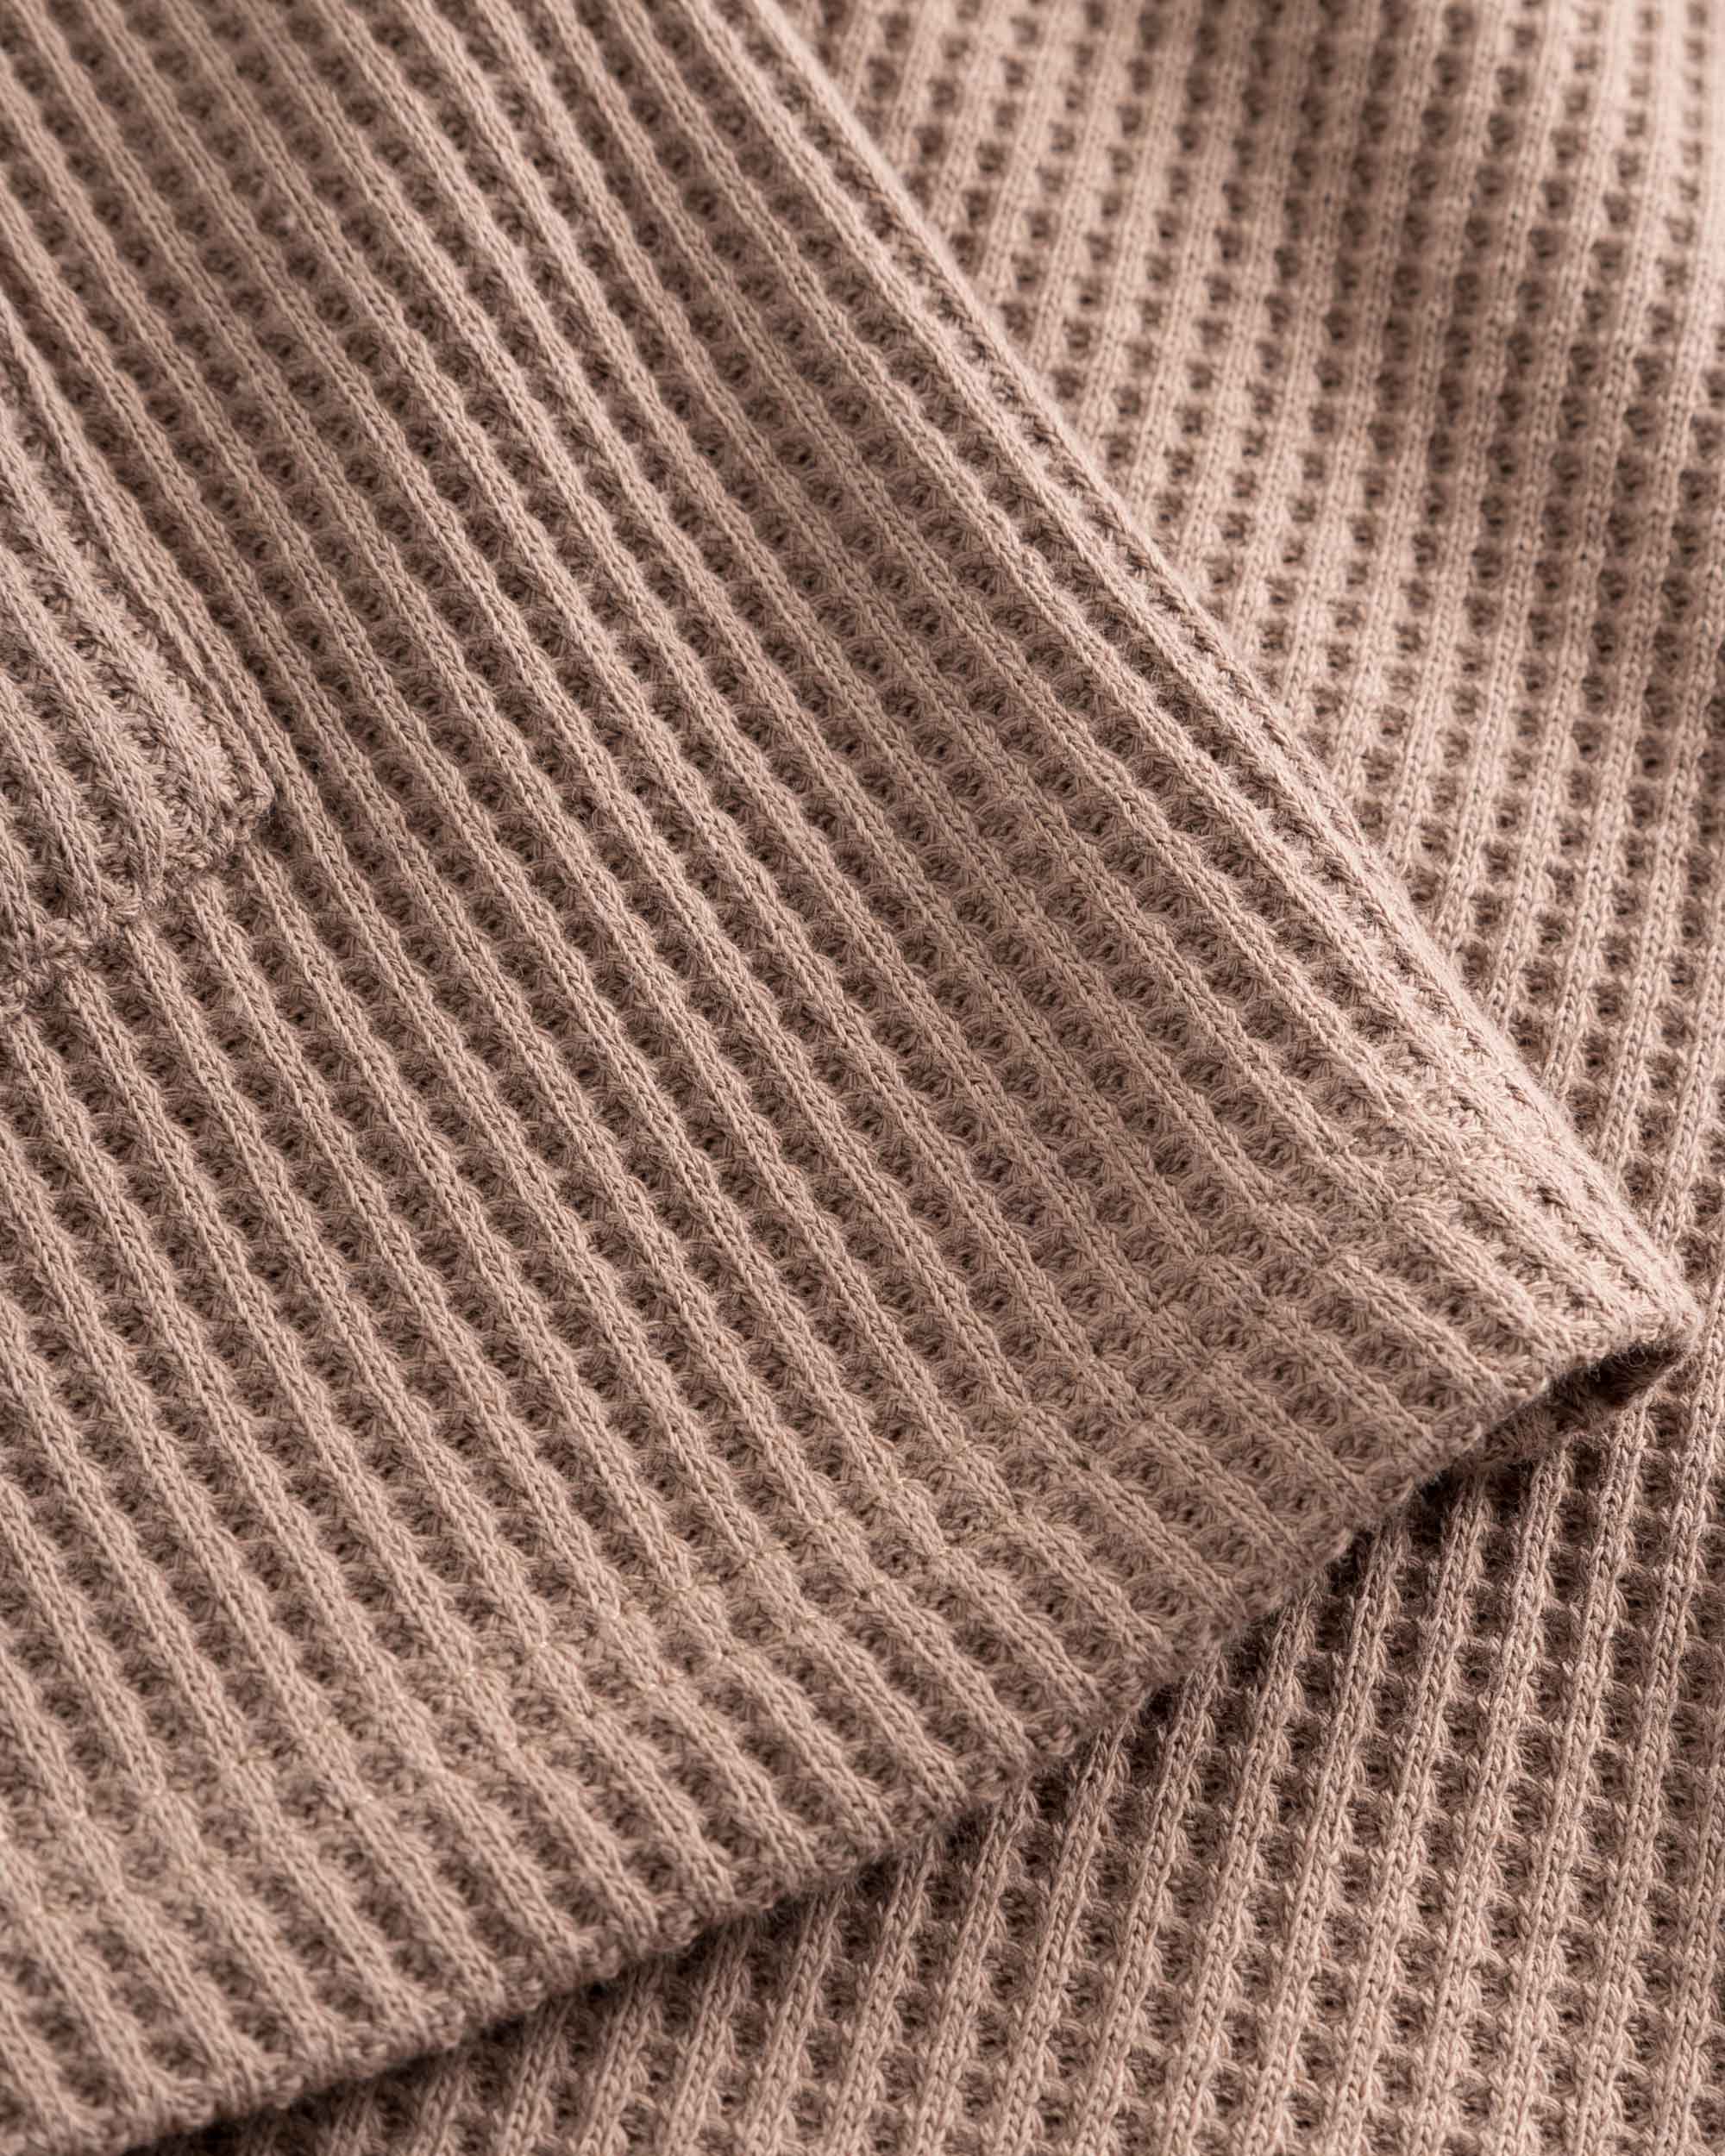 Close-up of stitchings and sleeve on a brown waffle-patterned shirt.